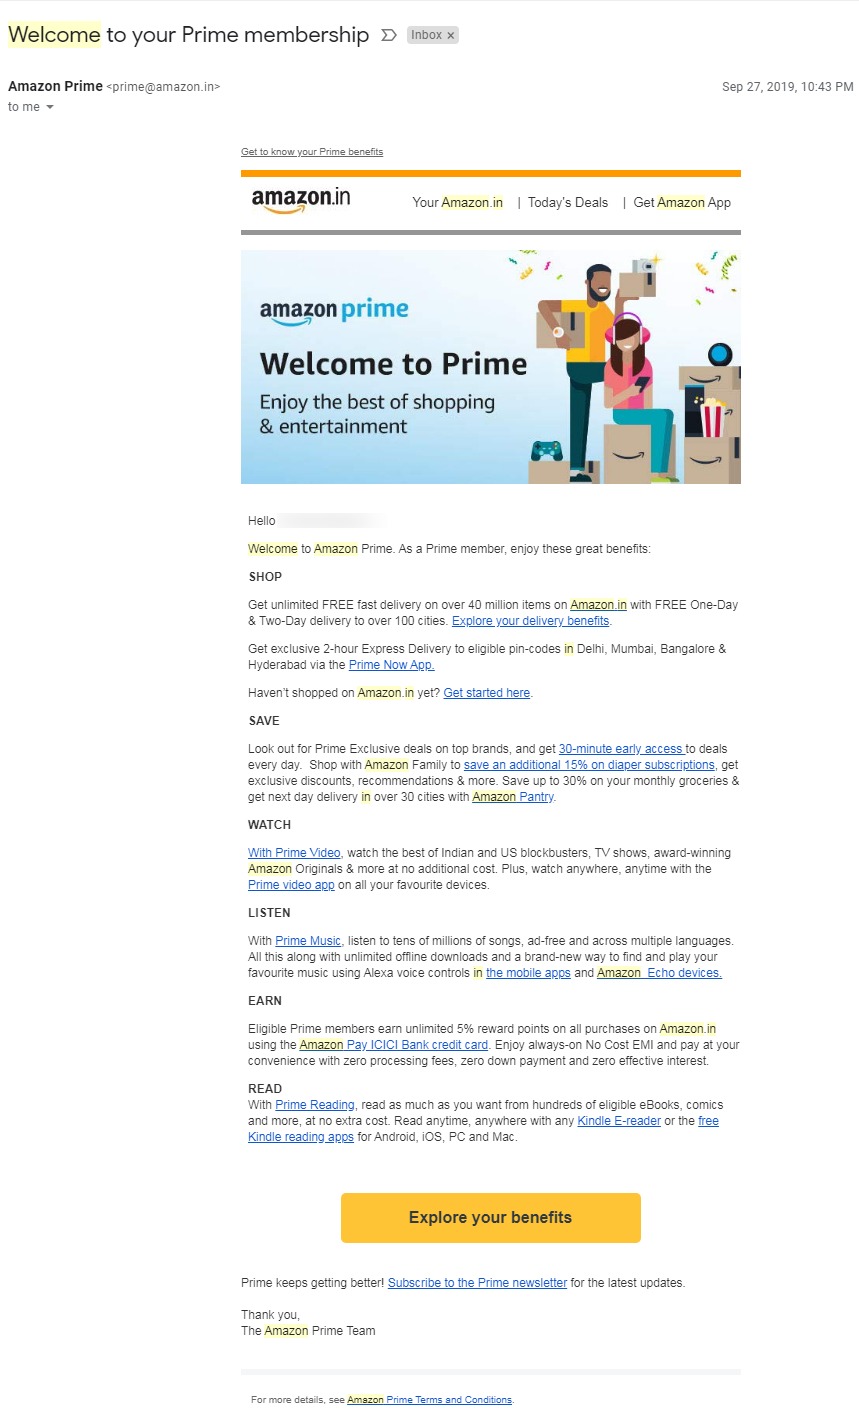 Amazon's Prime Welcome Onboard Email